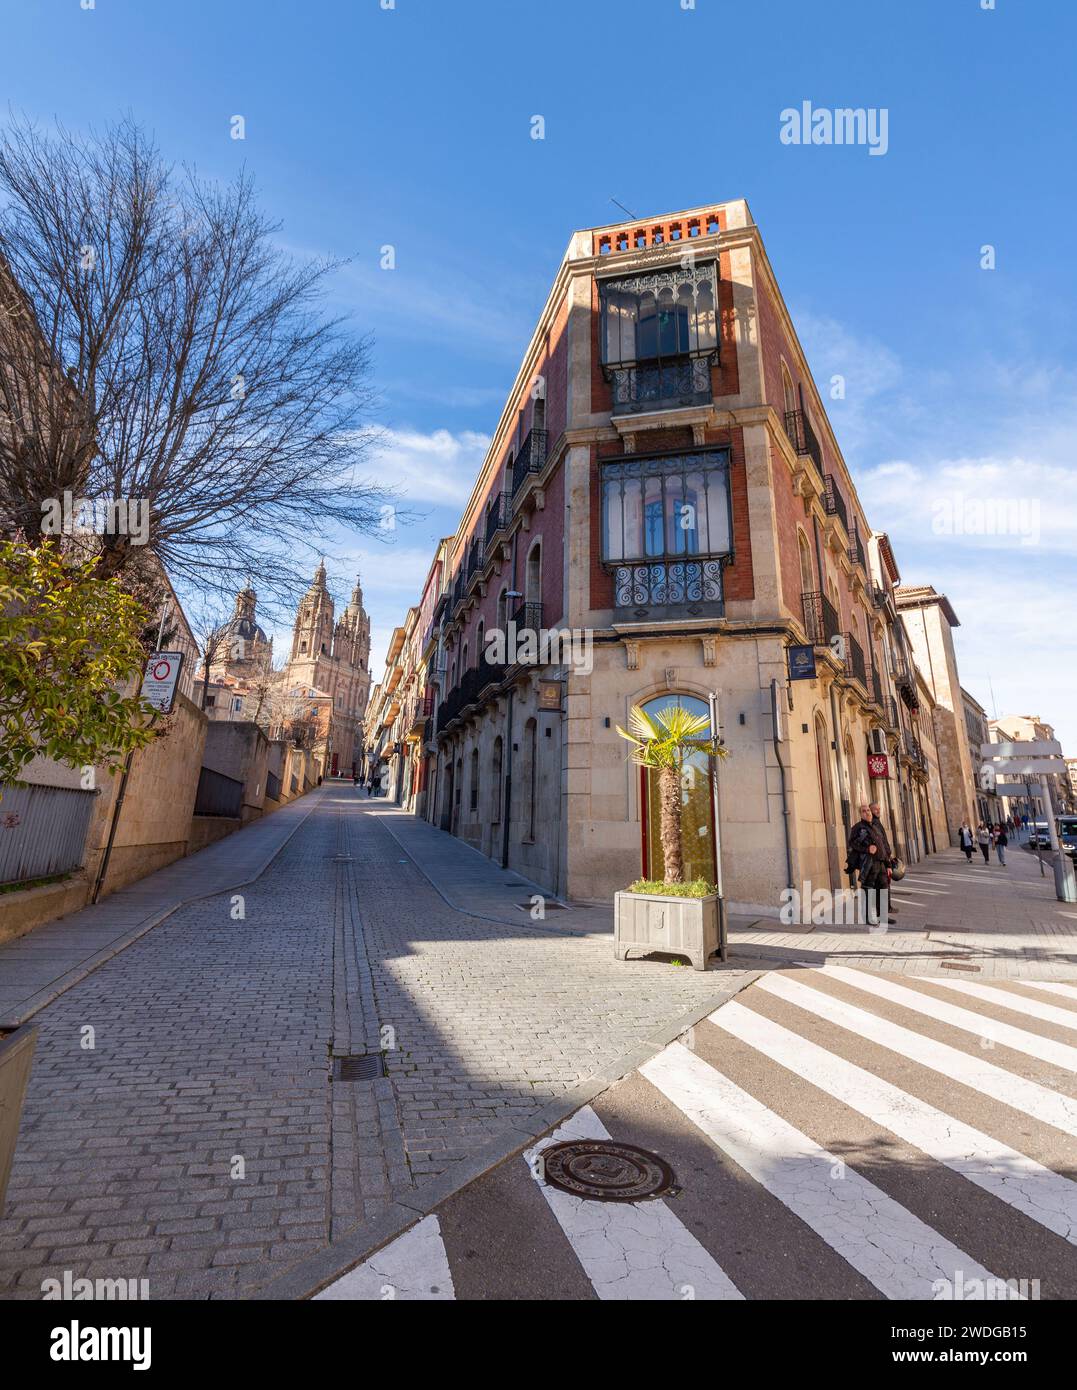 Salamanca, Spain-FEB 20, 2022: Generic architecture and street view from Salamanca, a historical city in Castile and Leon region of Spain. Stock Photo